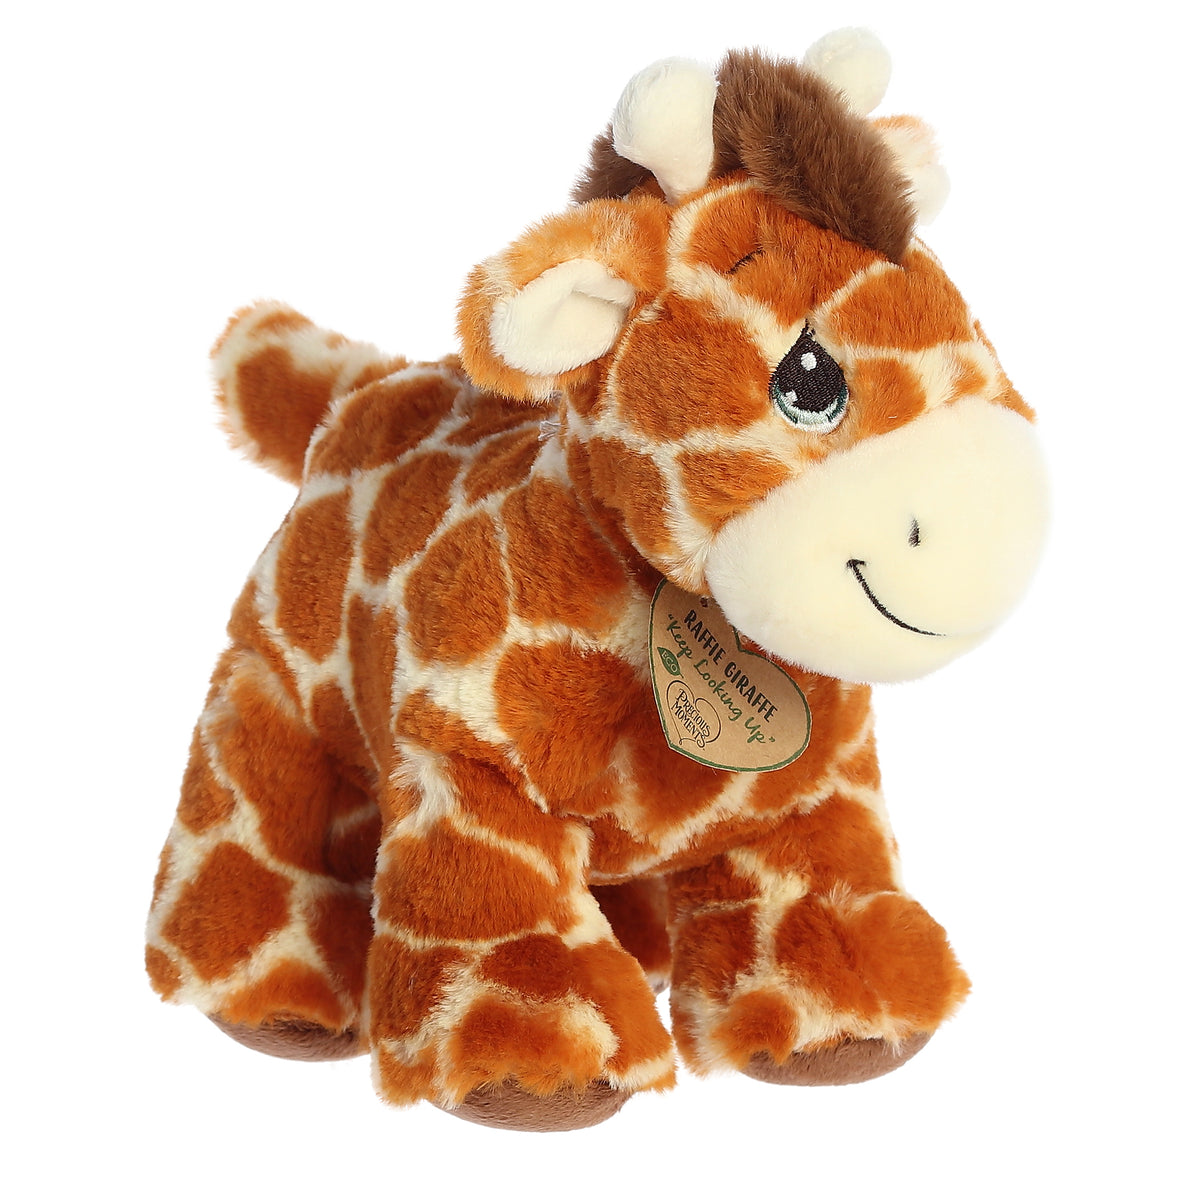 An eco-friendly giraffe plush with tear-drop eyes, traditional pattern, and a precious moments inspirational tag on its neck.